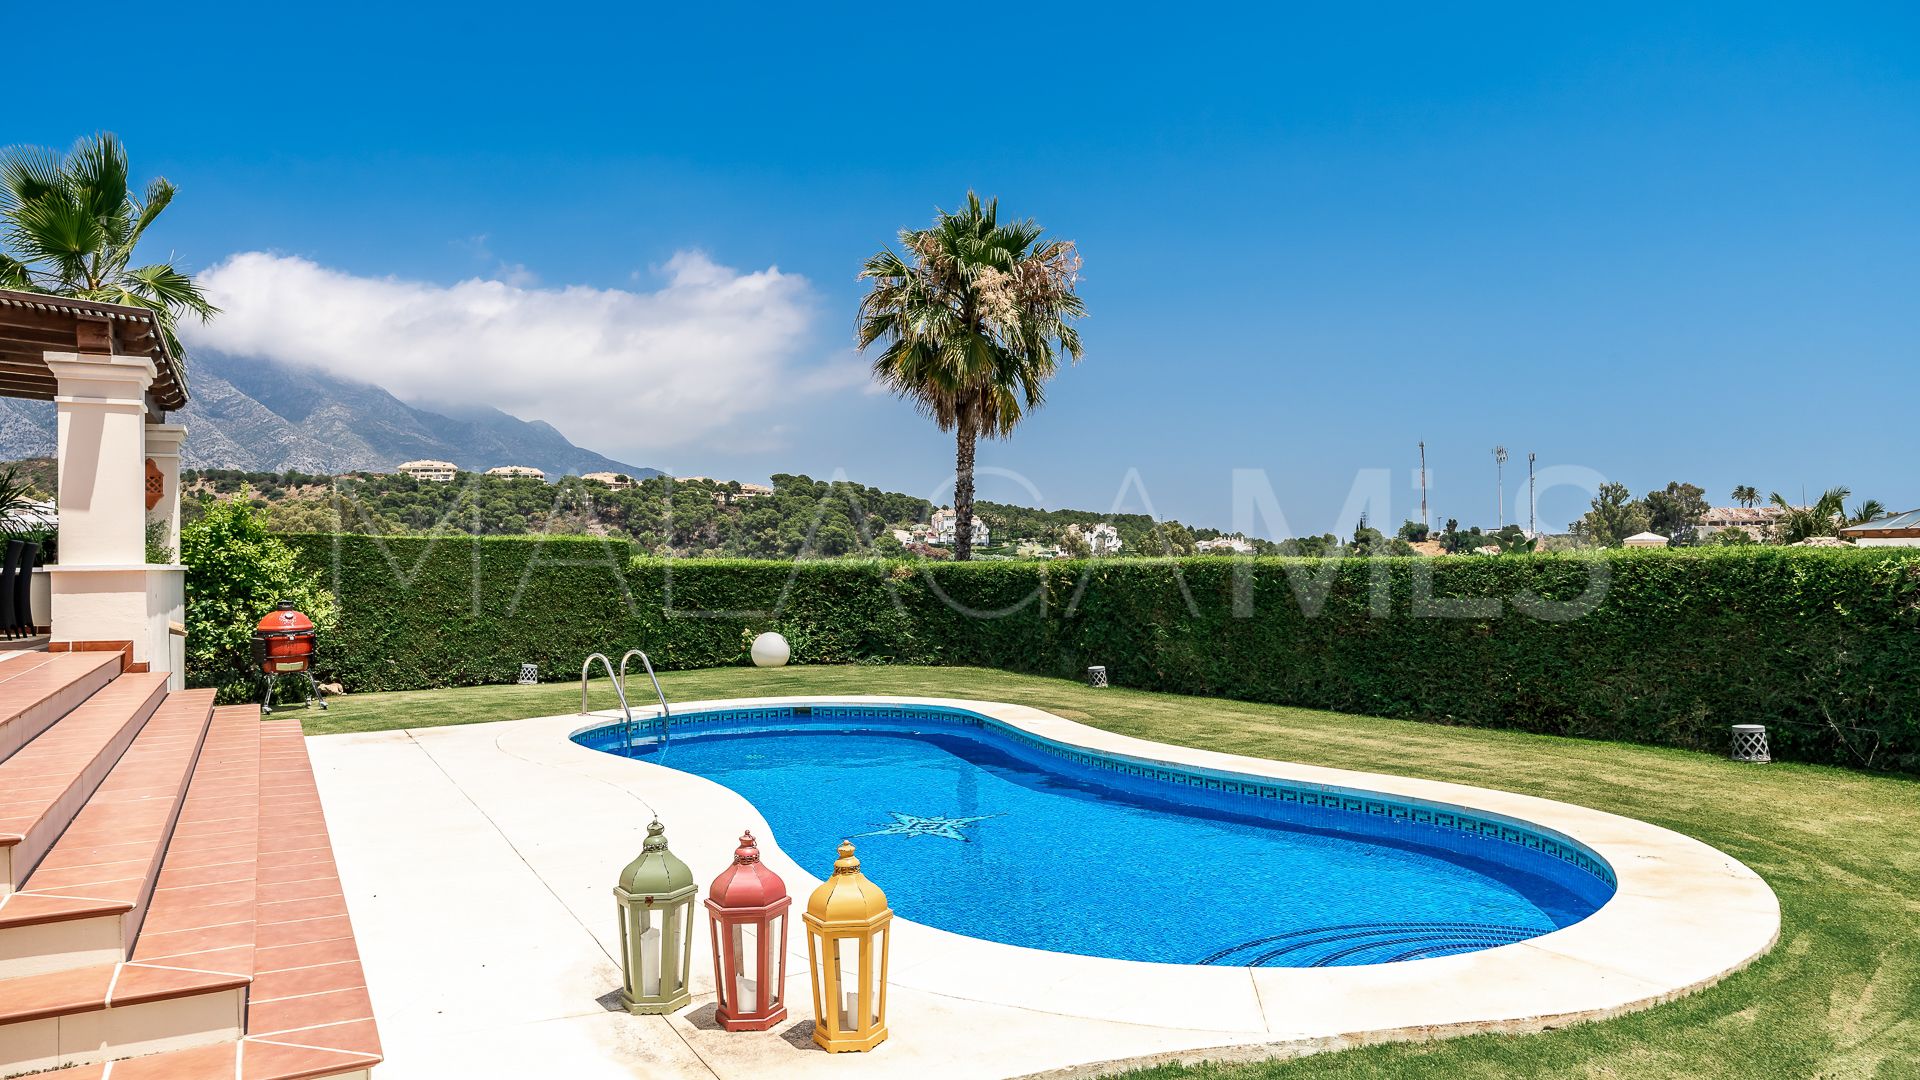 Villa for sale in Supermanzana H with 7 bedrooms